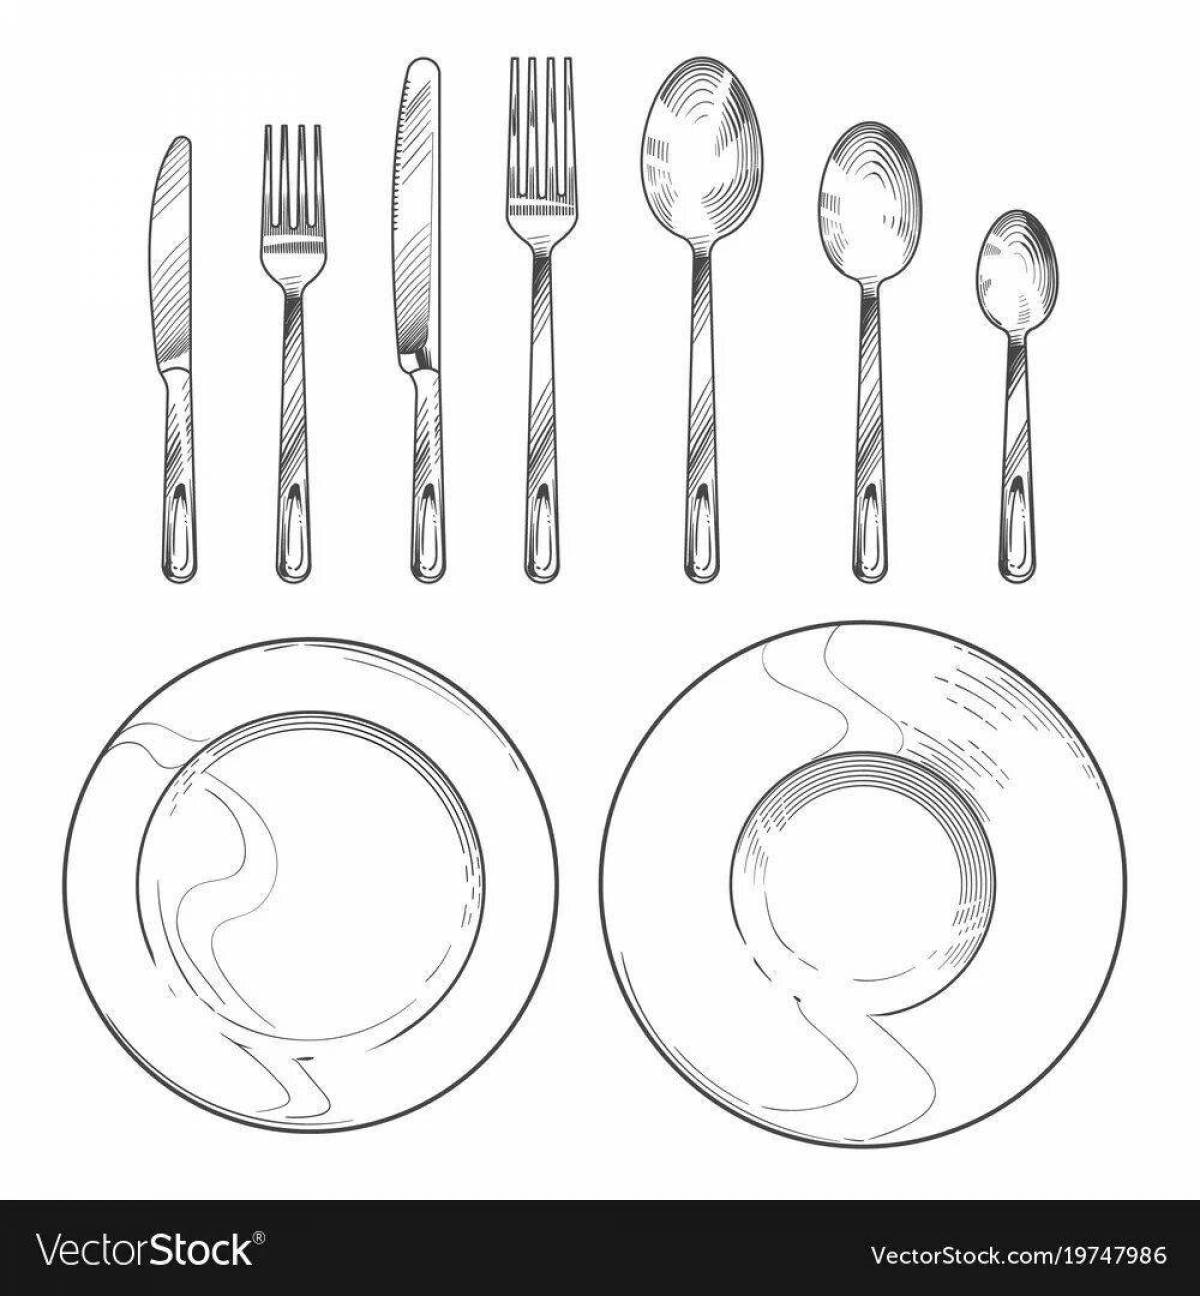 A fun cutlery coloring book for teens